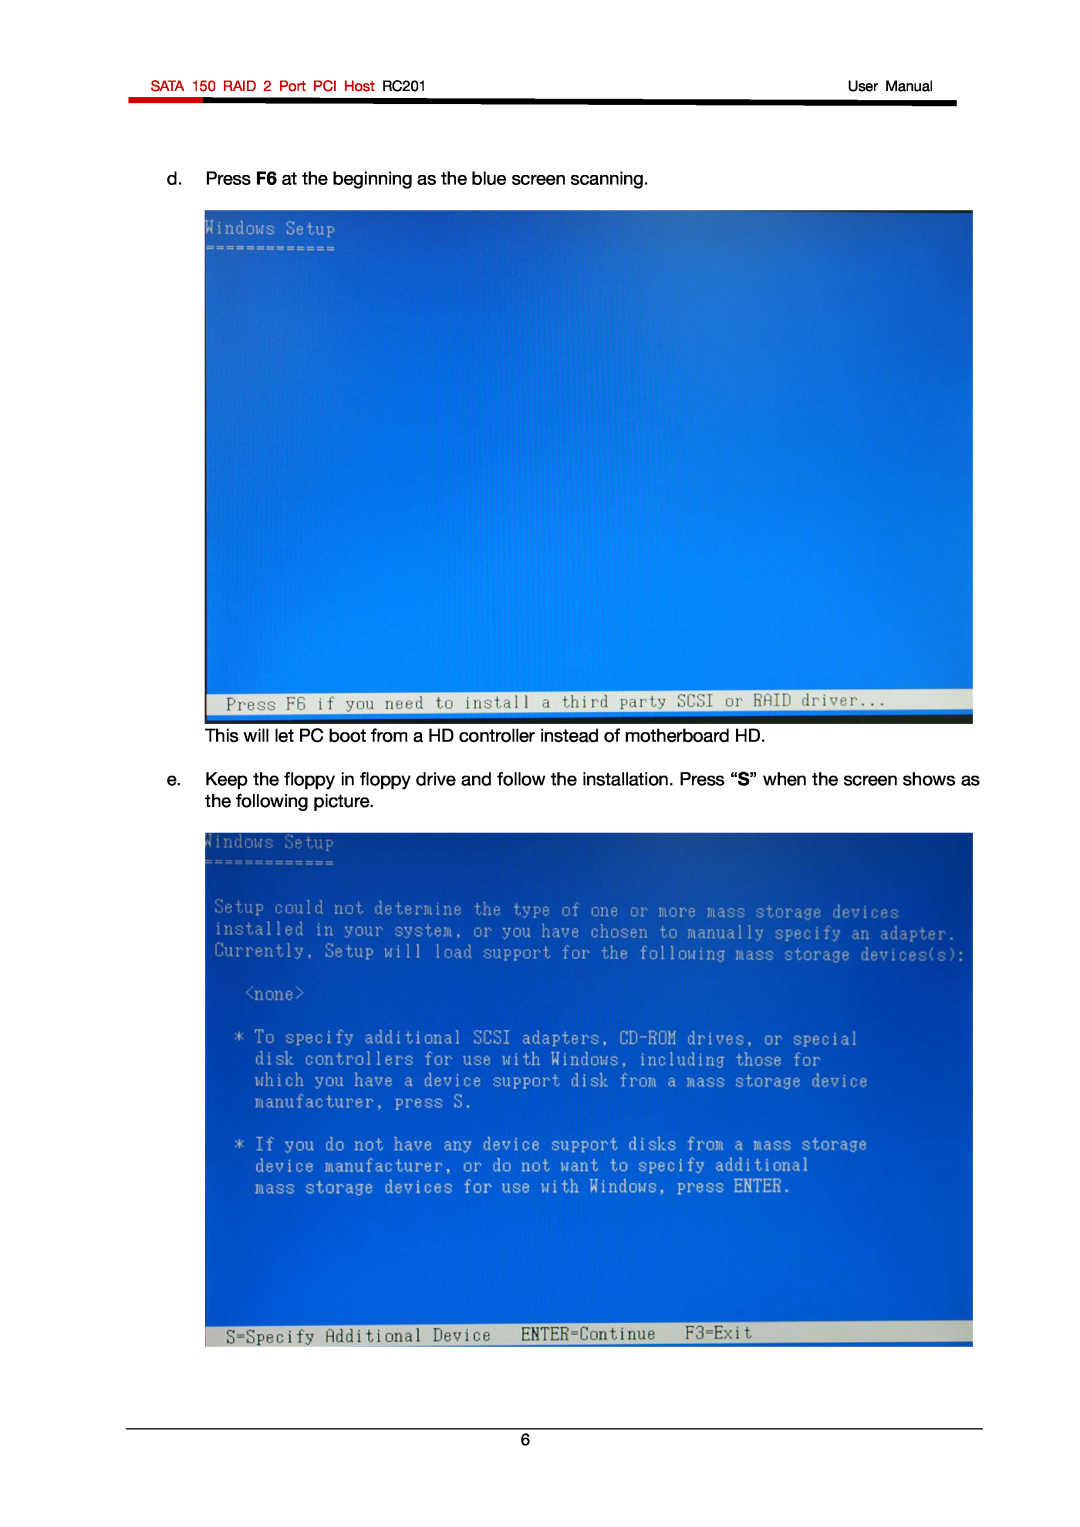 Rosewill d. Press F6 at the beginning as the blue screen scanning, SATA 150 RAID 2 Port PCI Host RC201, User Manual 